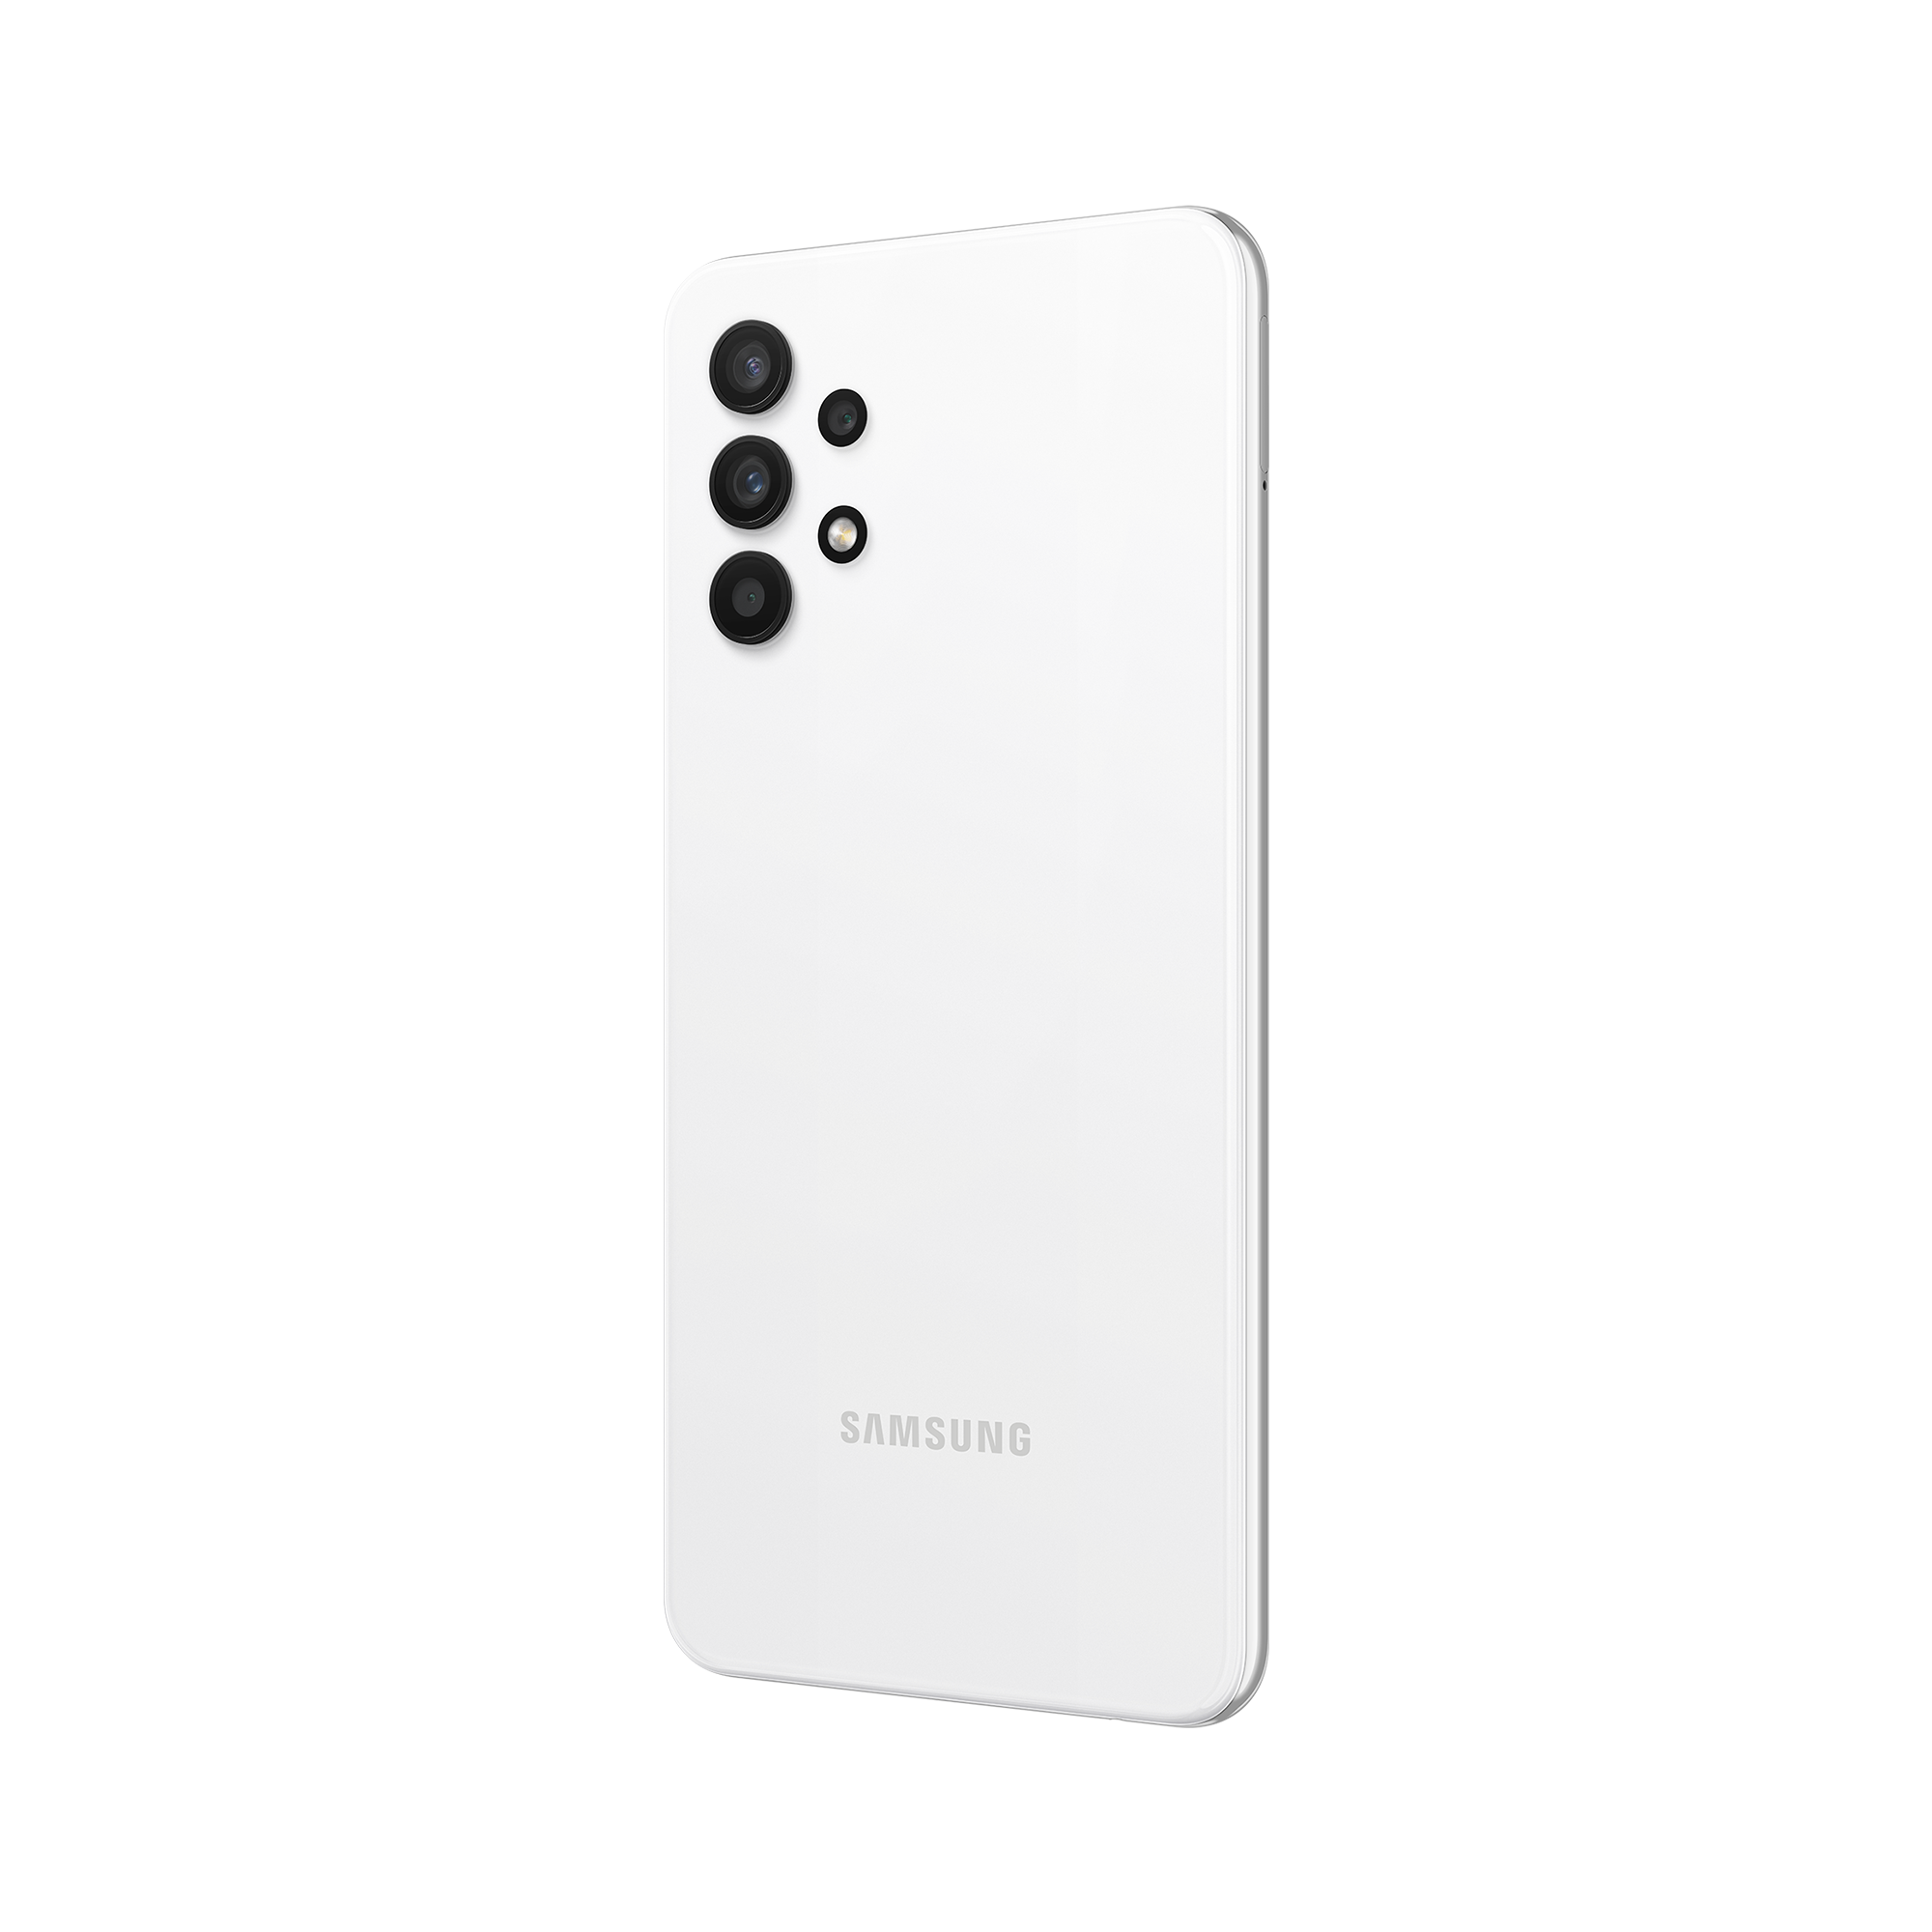 Samsung Galaxy A32 Awesome White Back Right